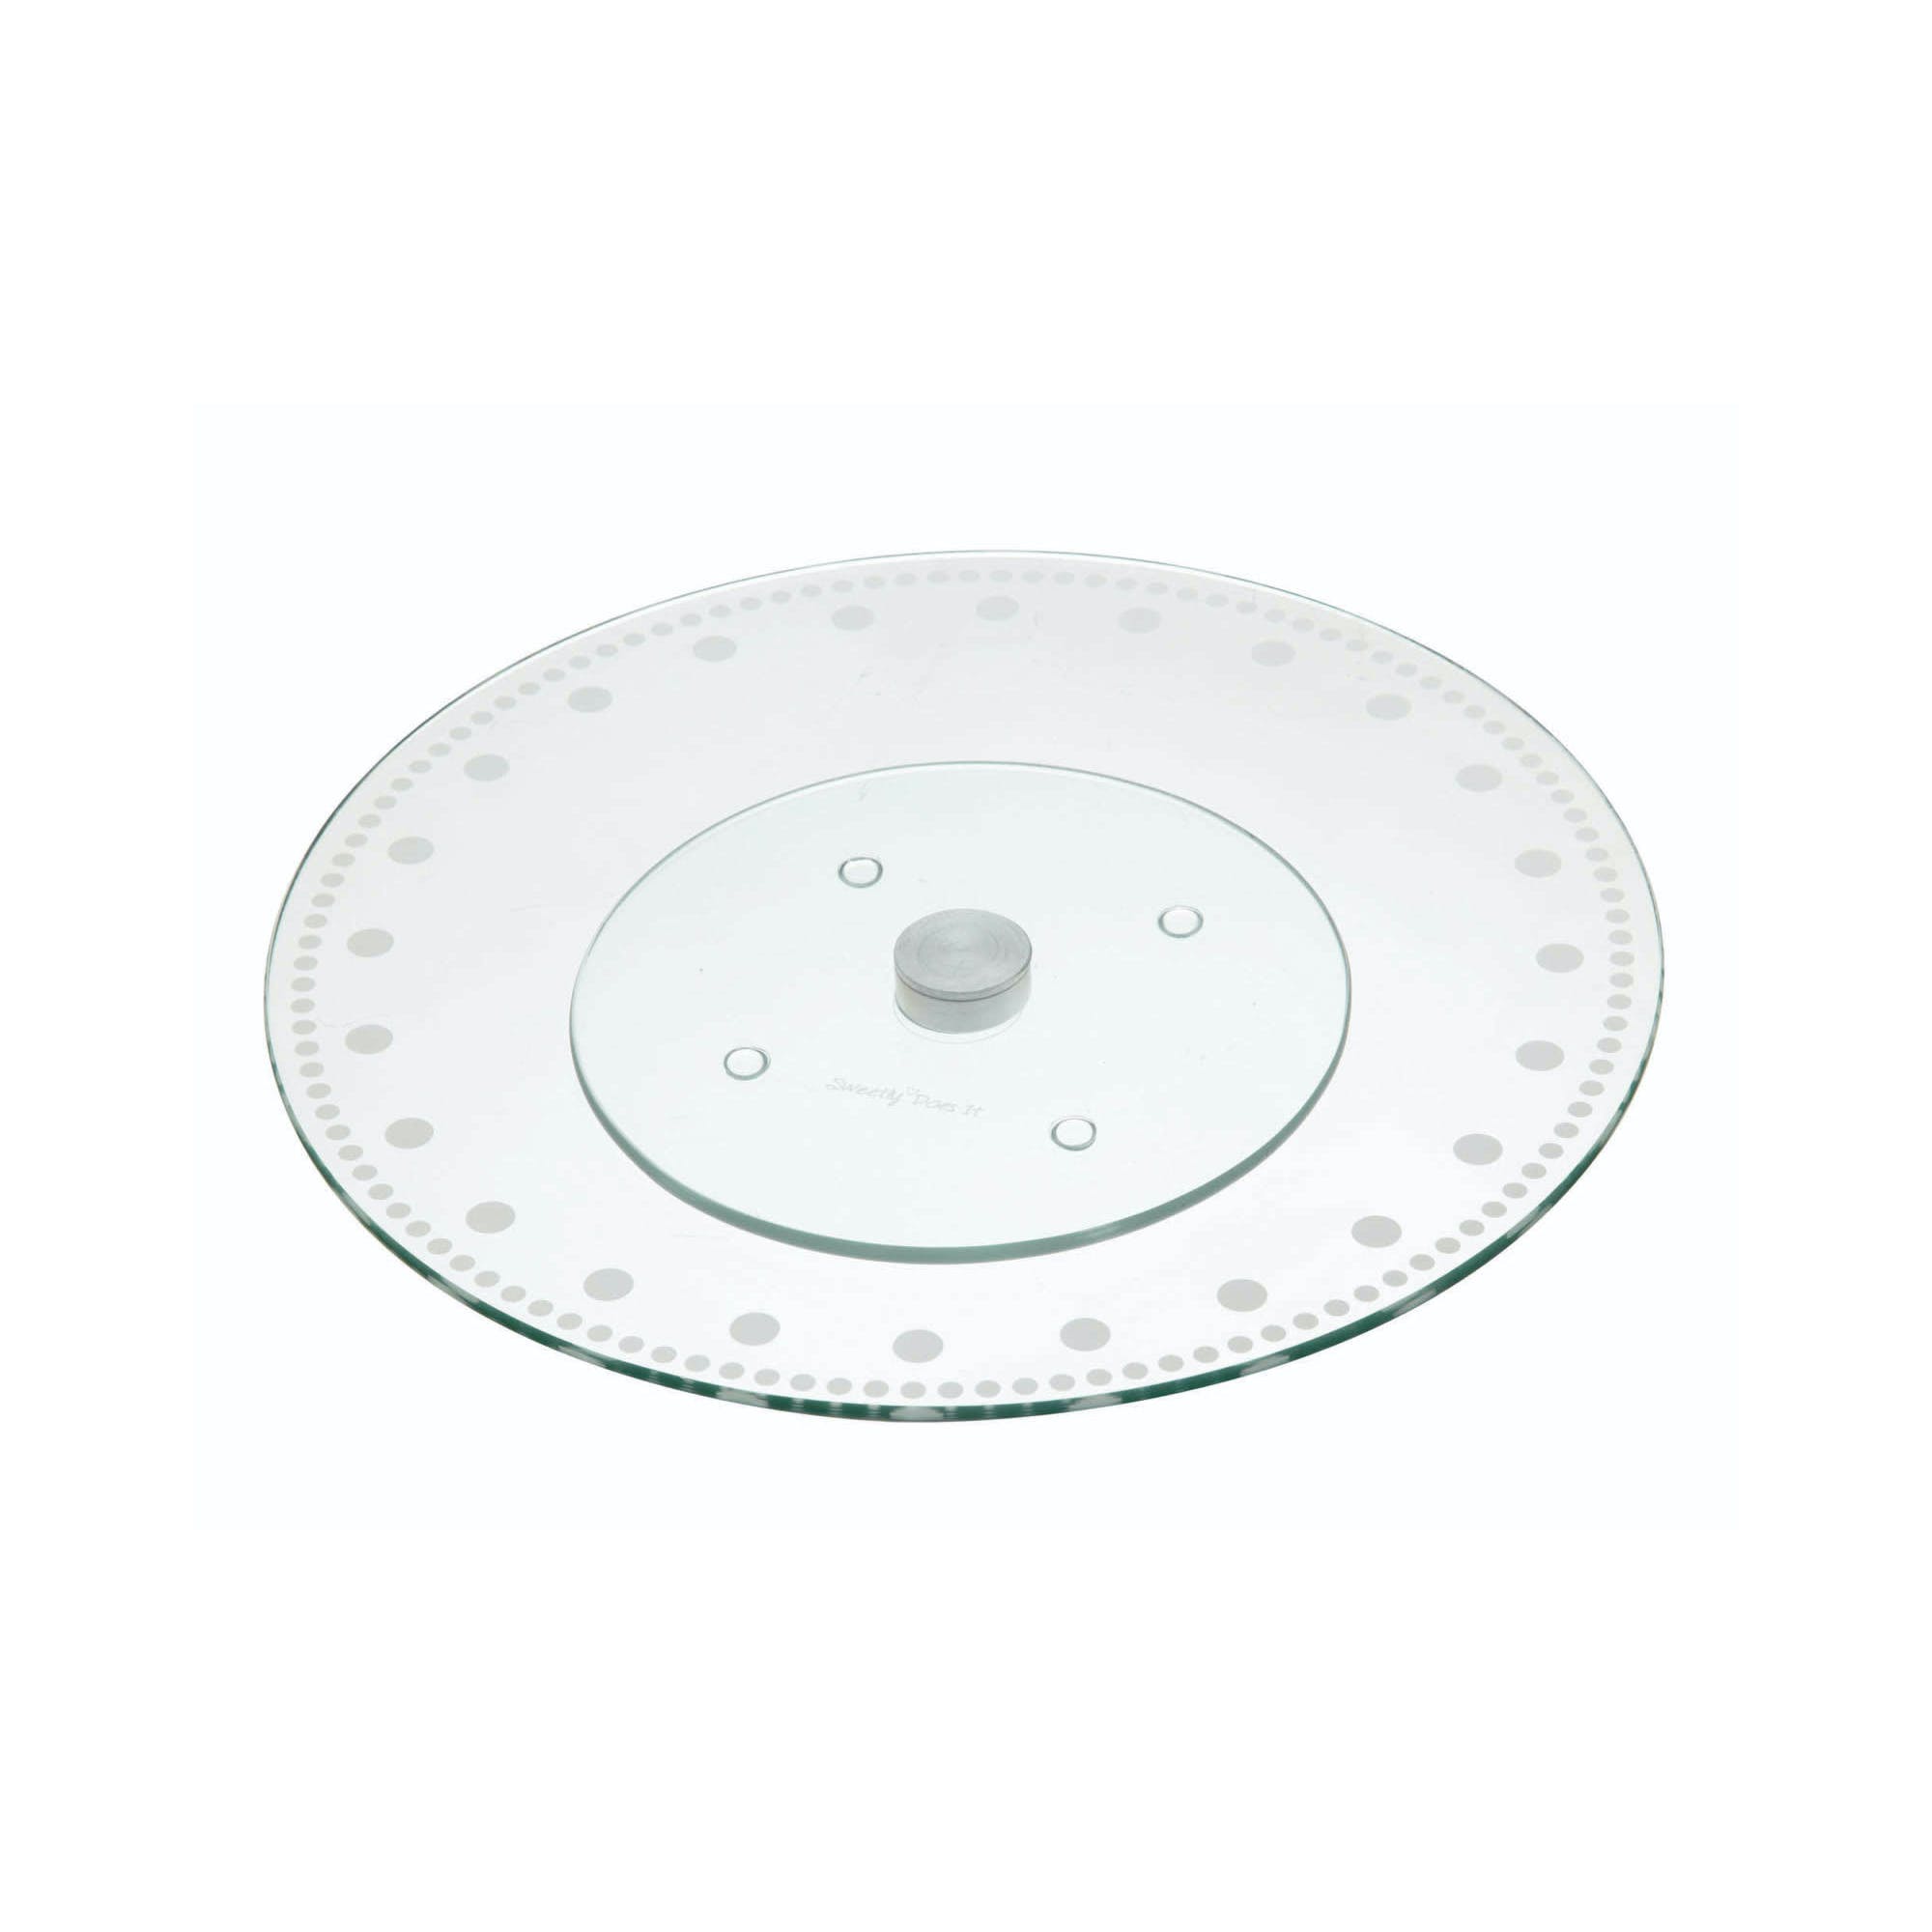 Sweetly Does It Revolving Glass Turntable Cake Stand - The Cooks Cupboard Ltd